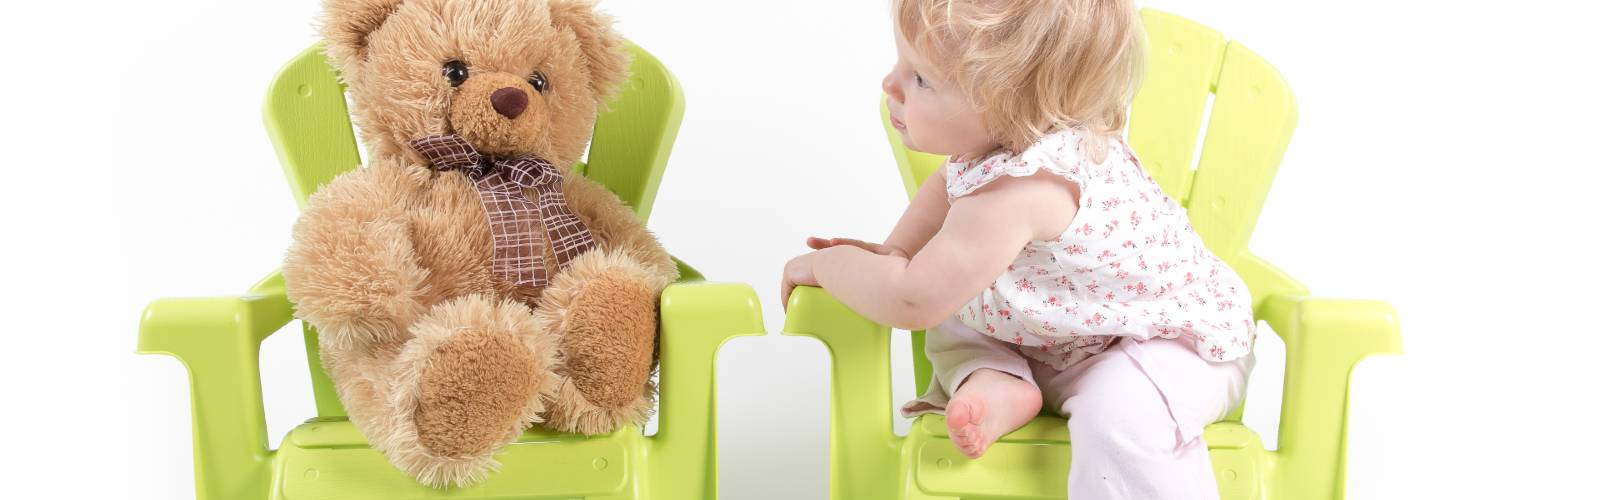 A child seated in a green chair looking at a teddy bear also seated in a separate green chair